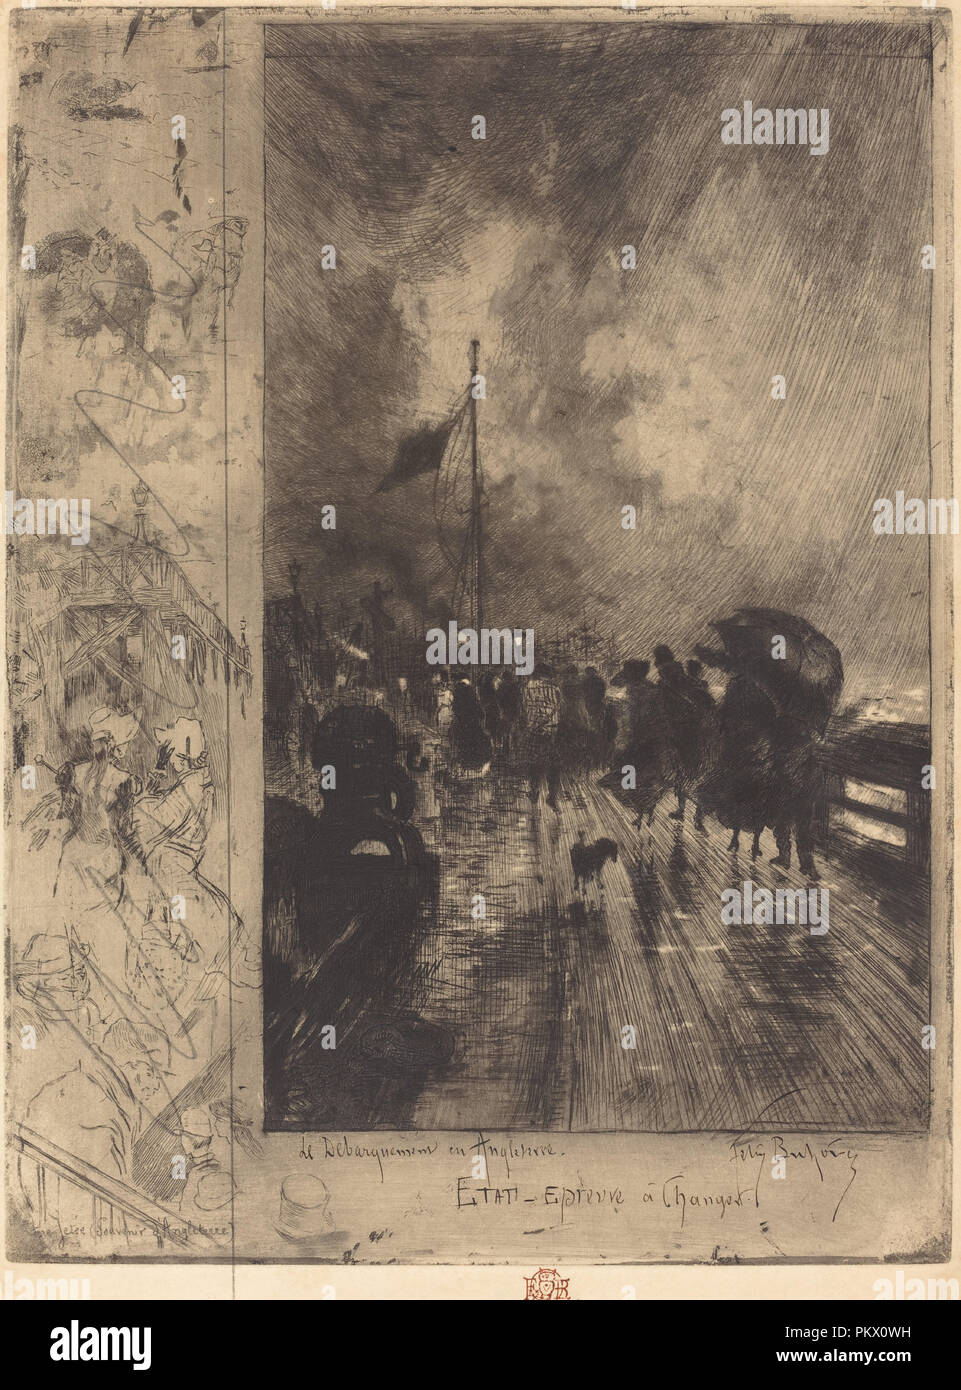 Un Débarquement en Angleterre (Landing in England). Dated: 1879. Dimensions: plate: 31.9 x 24 cm (12 9/16 x 9 7/16 in.). Medium: etching, drypoint, aquatint (dust ground and spirit ground), softground etching, and roulette in black with the artist's revisions in graphite on moderately thick cream wove paper. Museum: National Gallery of Art, Washington DC. Author: Félix-Hilaire Buhot. Stock Photo